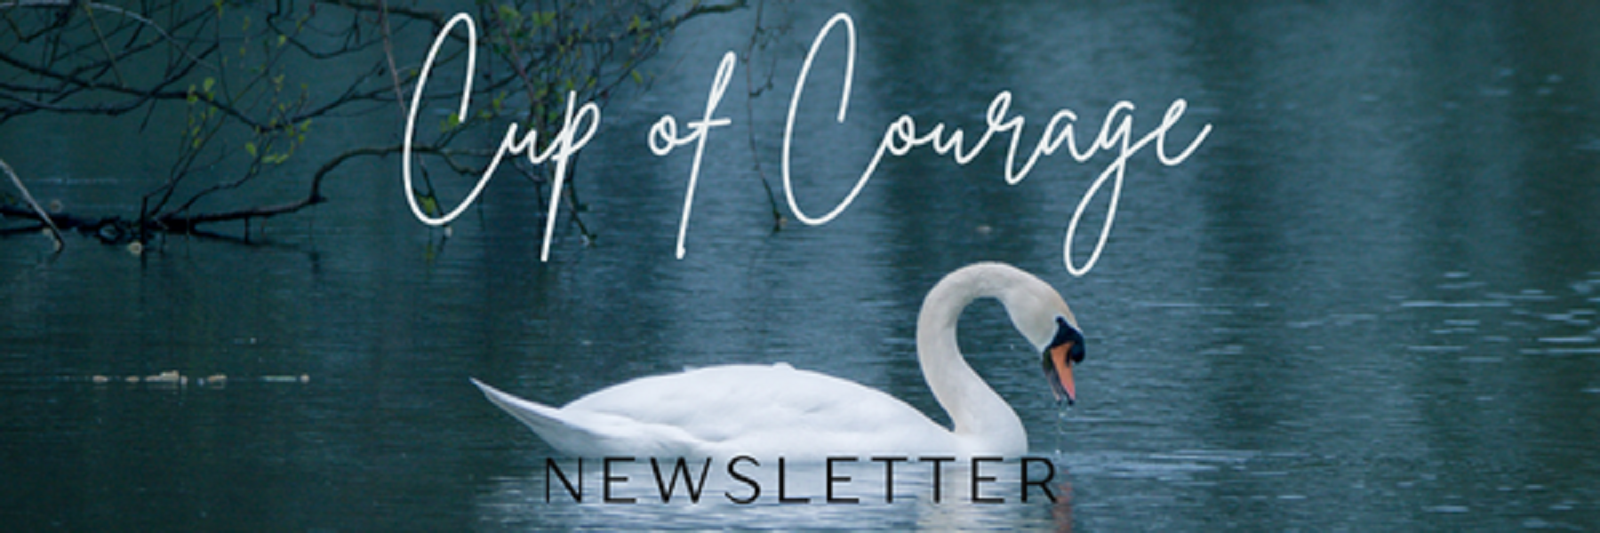 Cup of Courage Newsletter 2